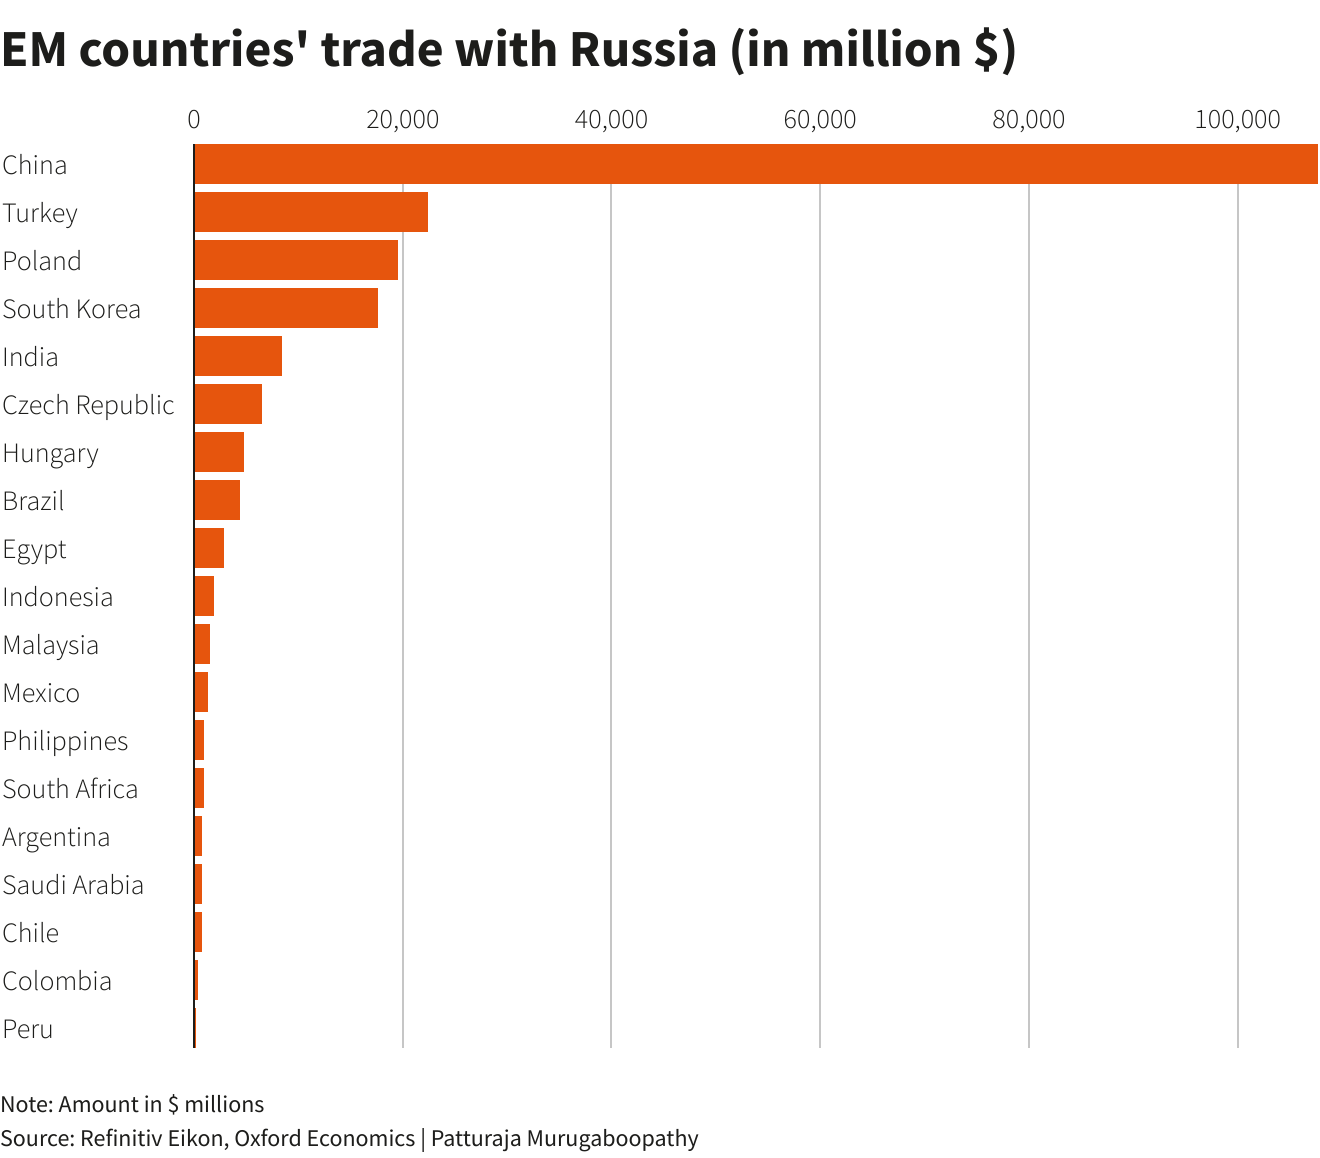 EM countries' trade with Russia (in million $)